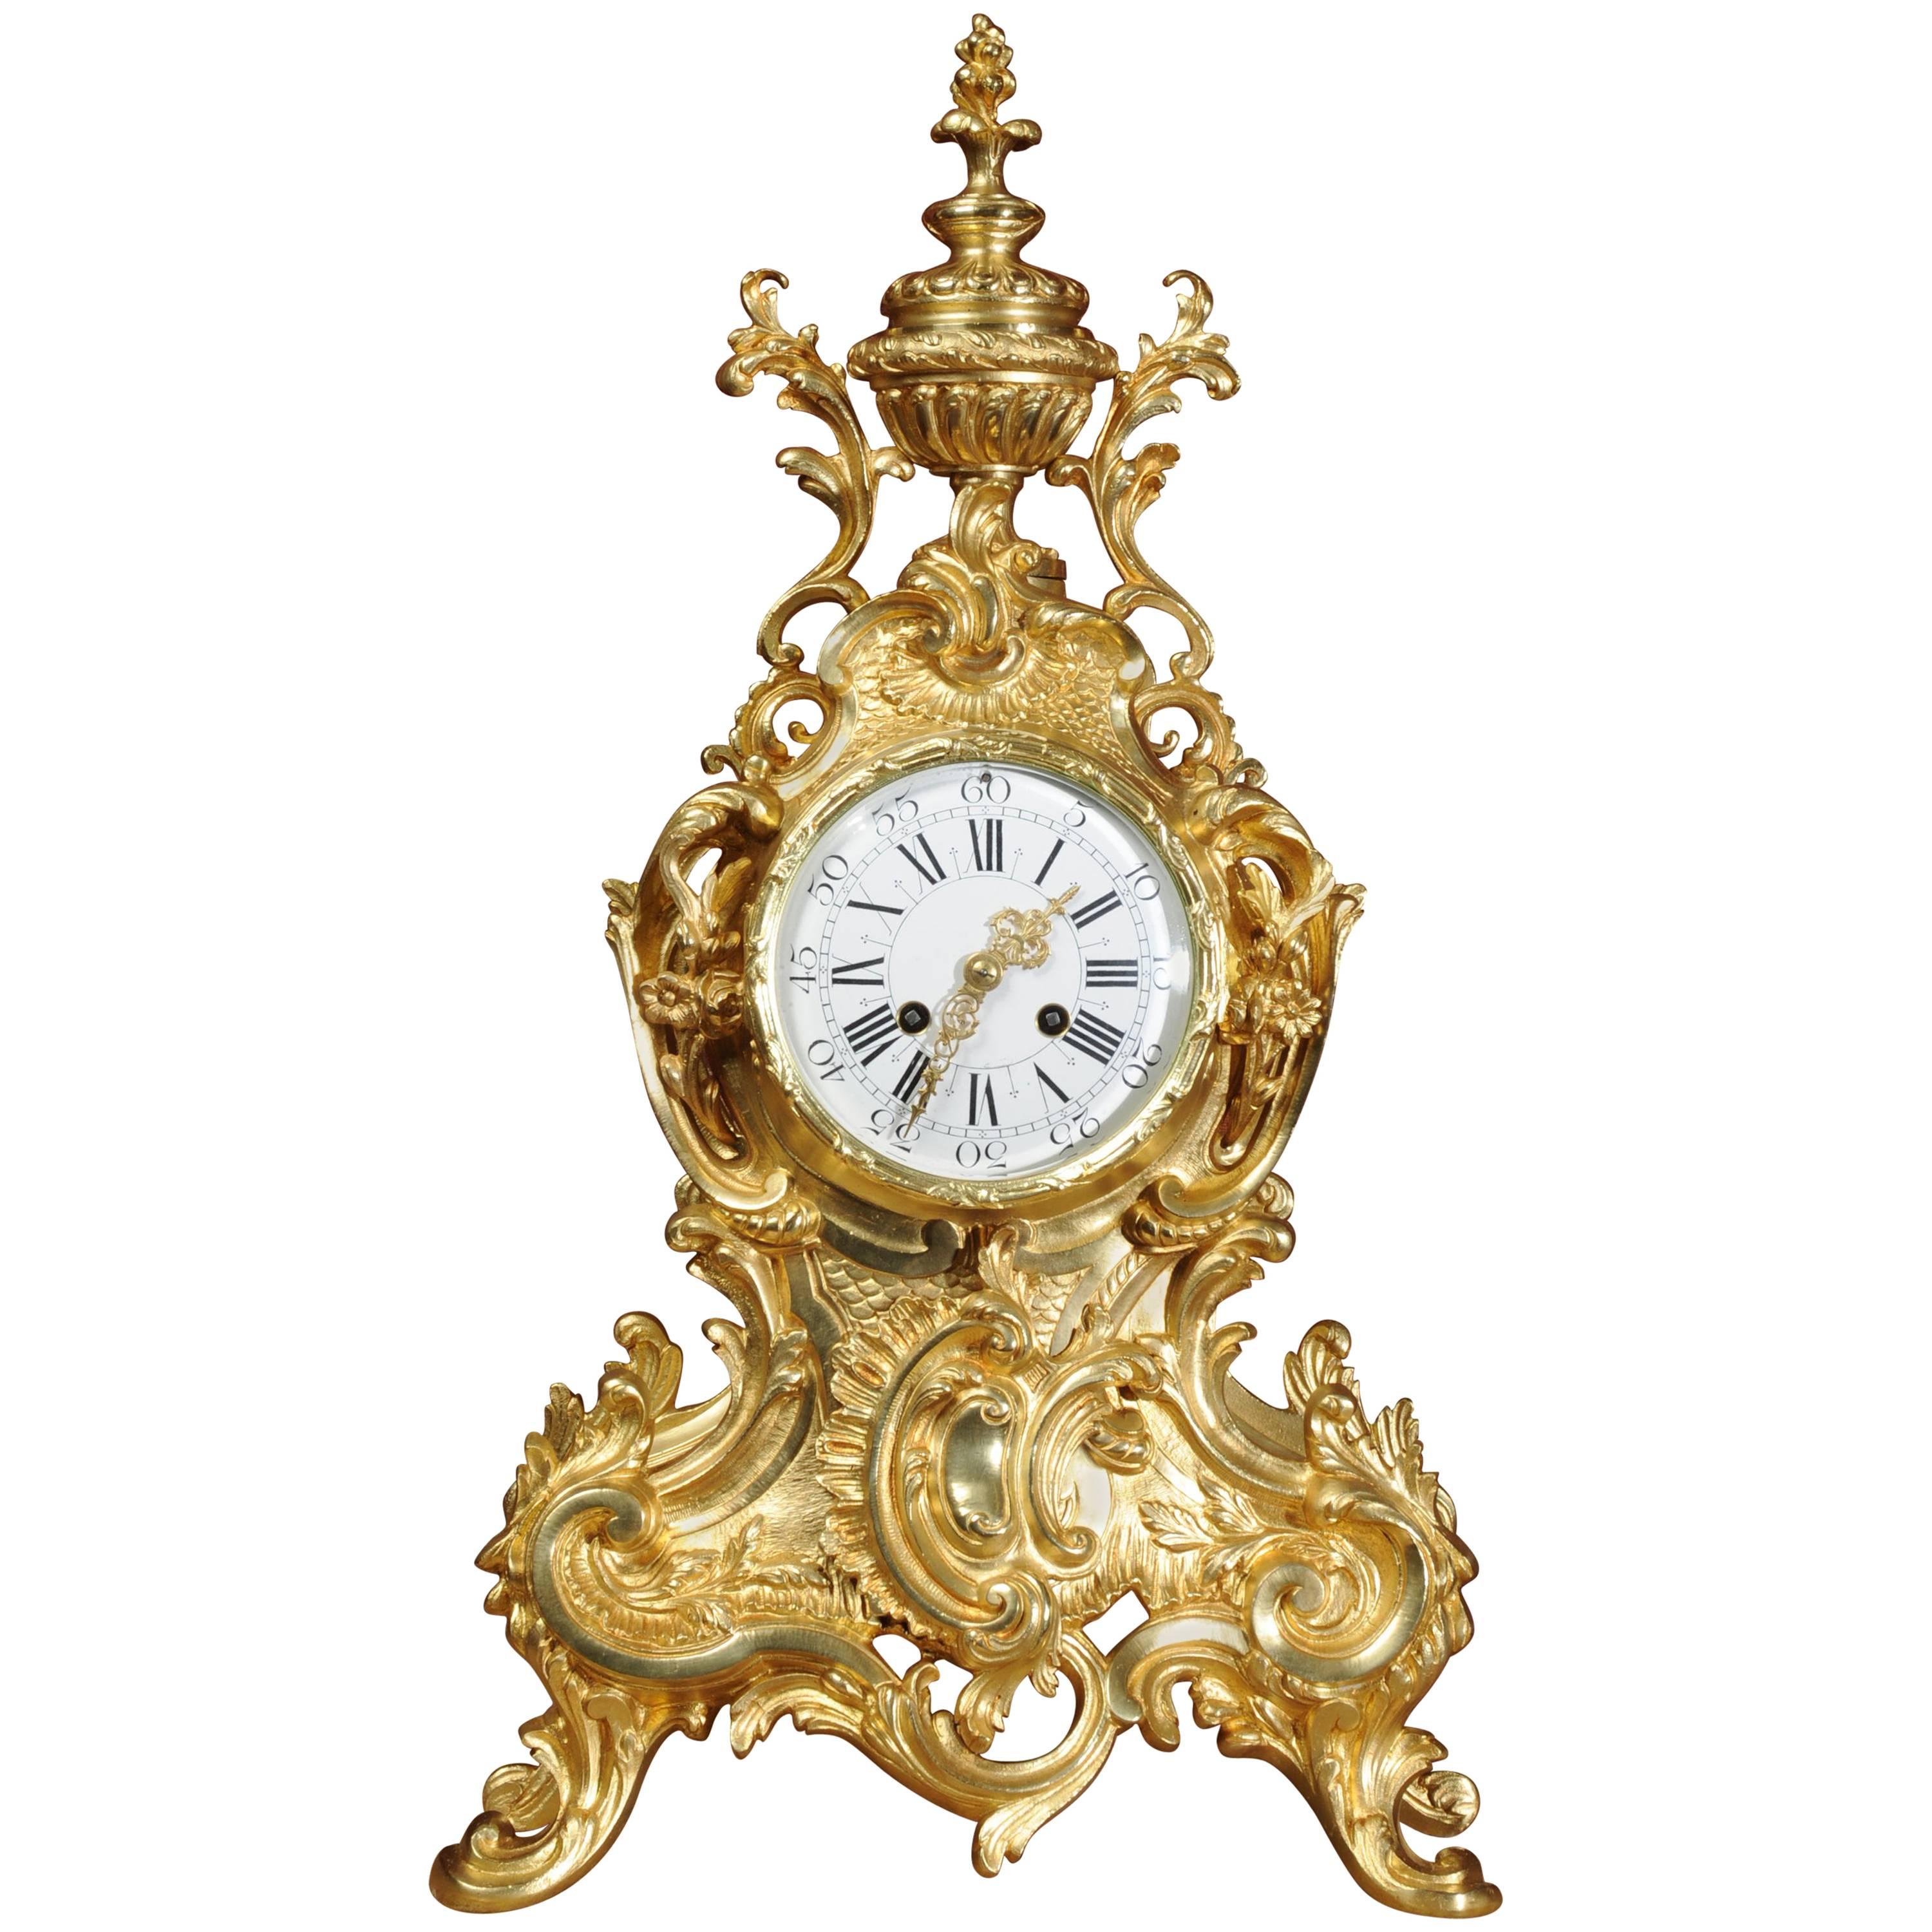 Stunning Large Antique French Gilt Bronze Rococo Clock by Vincenti, circa 1870